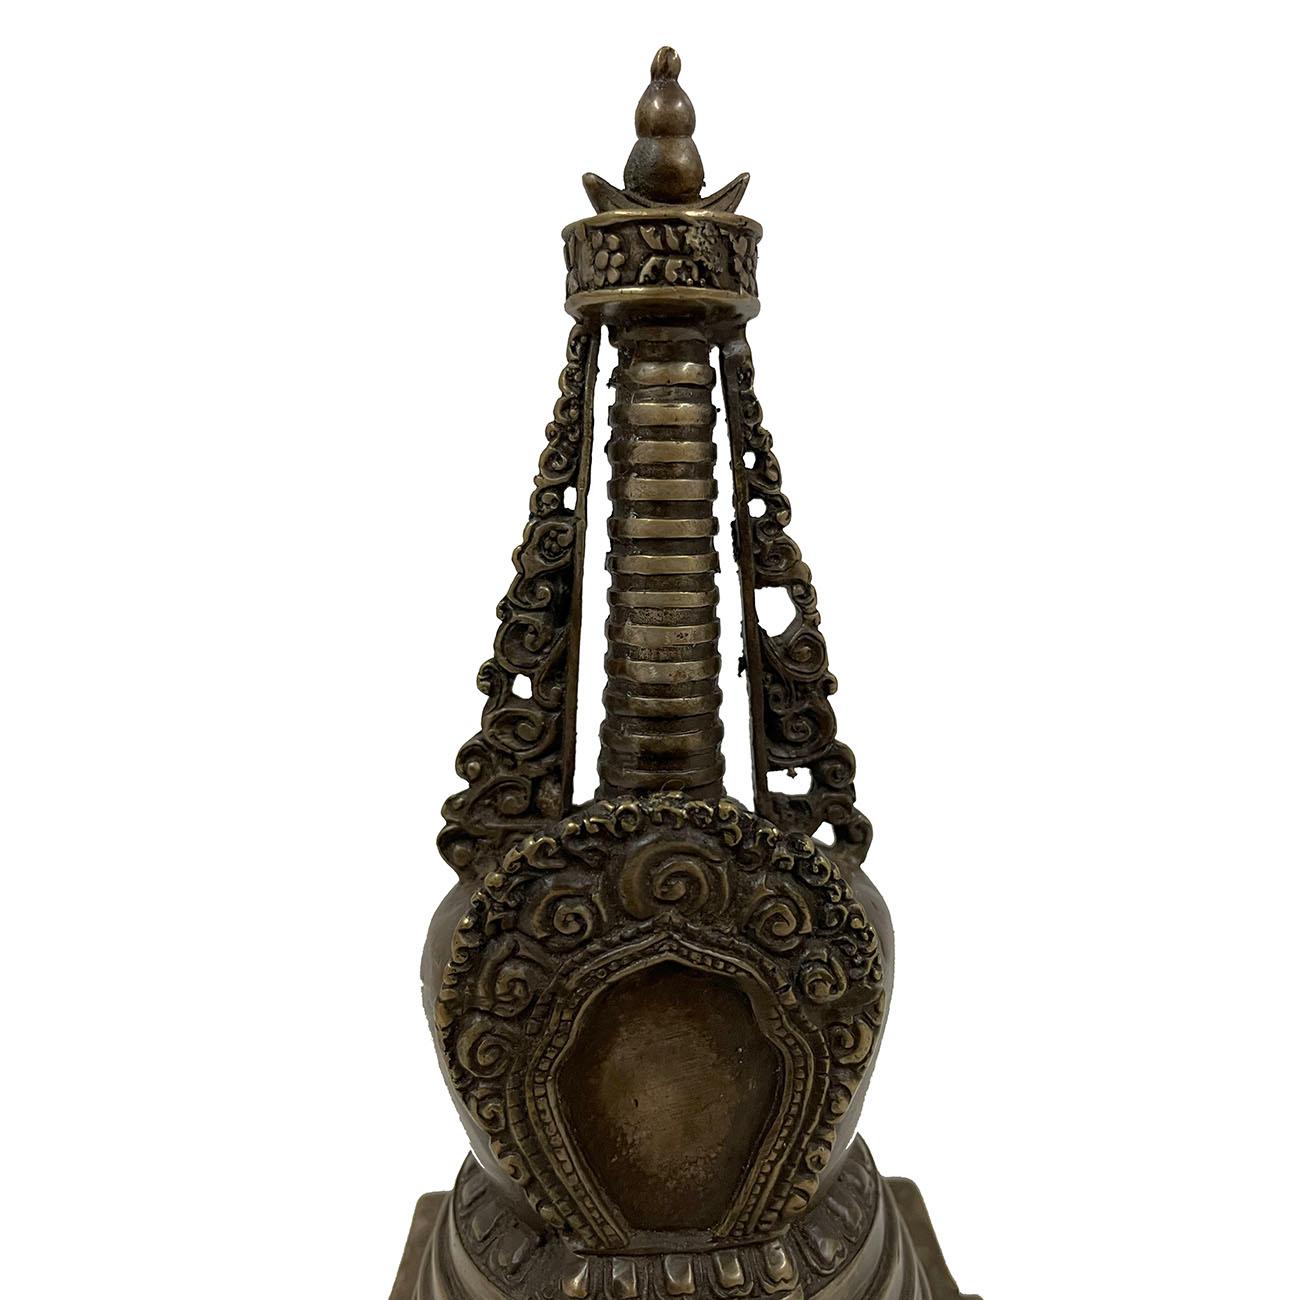 This is handcrafted Tibetan bronze Buddha Pagoda. It has detailed handcrafted Tibetan traditional design. Was used to store Buddha's/Monk's Sherizi. Look at the pictures, fine craftsmanship and sturdy construction made it a beautiful home decor or